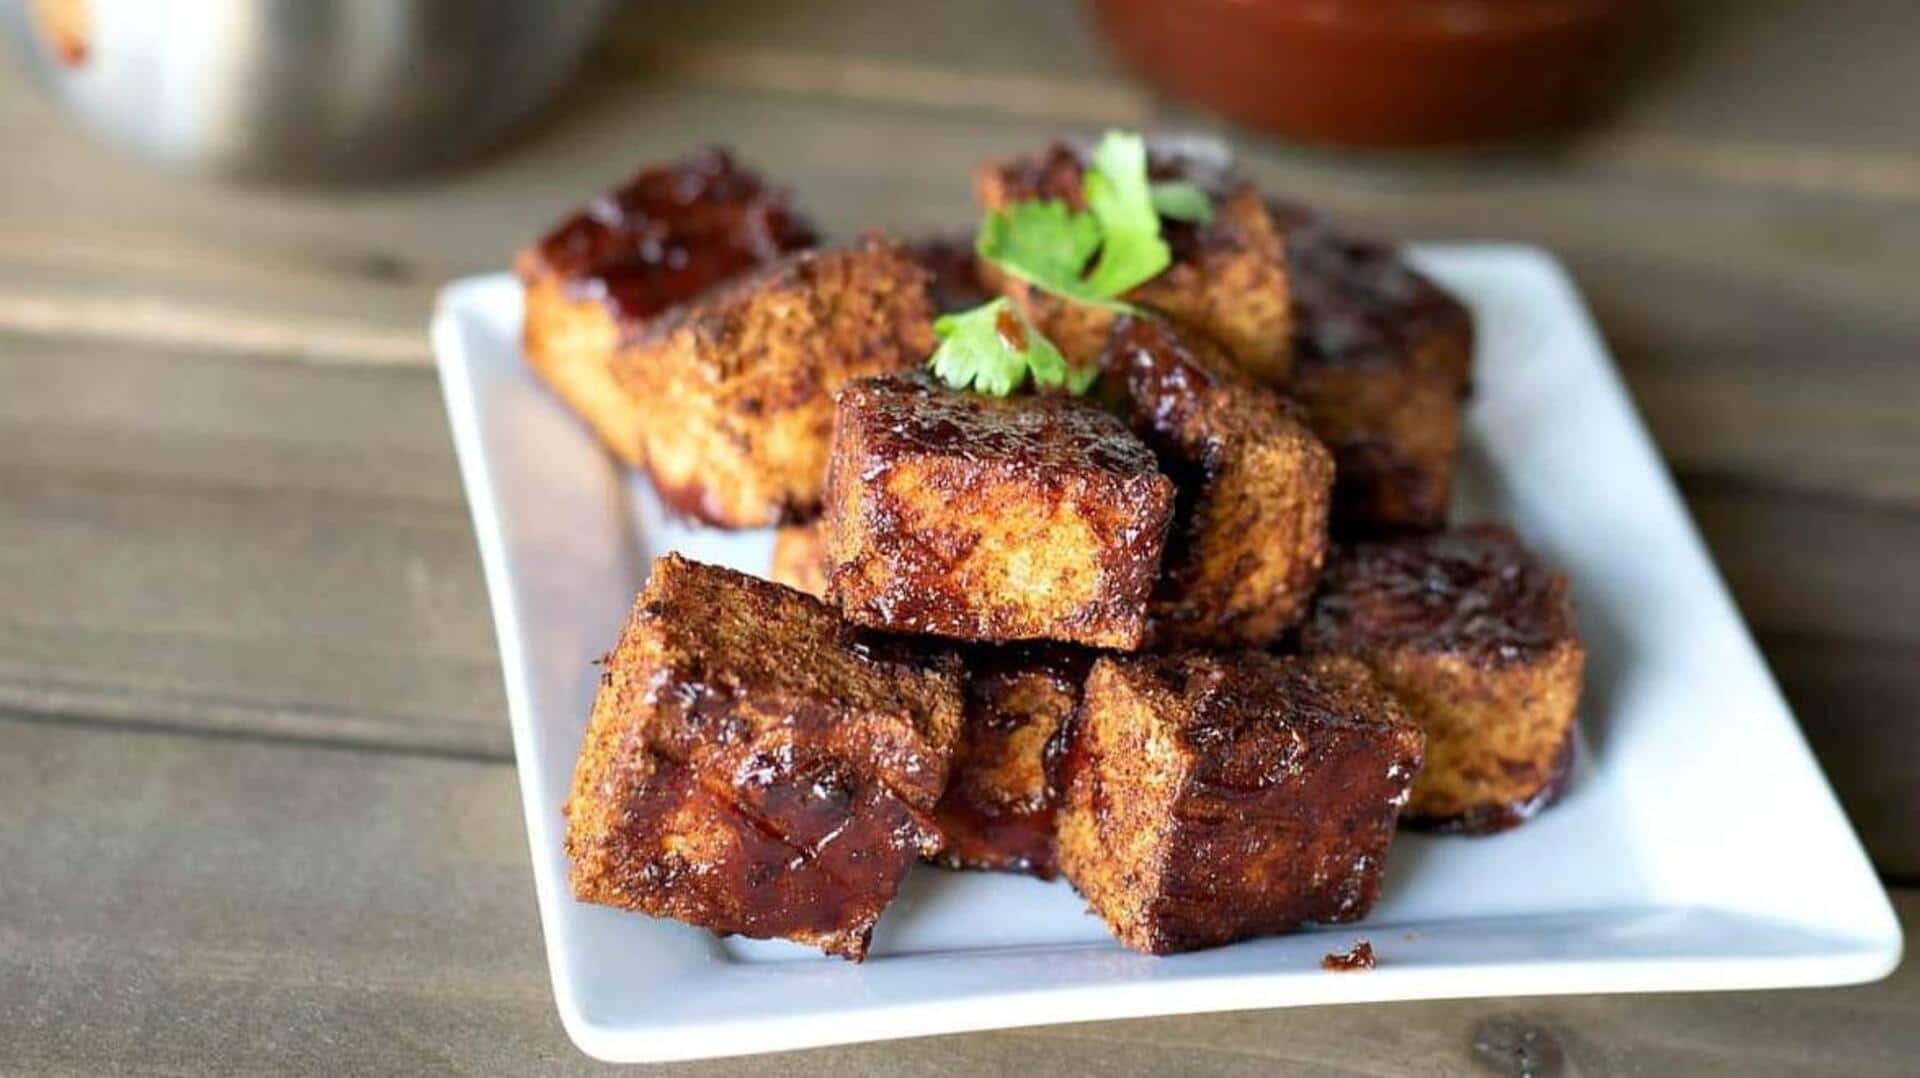 Have you tried this smoky tofu burnt ends recipe